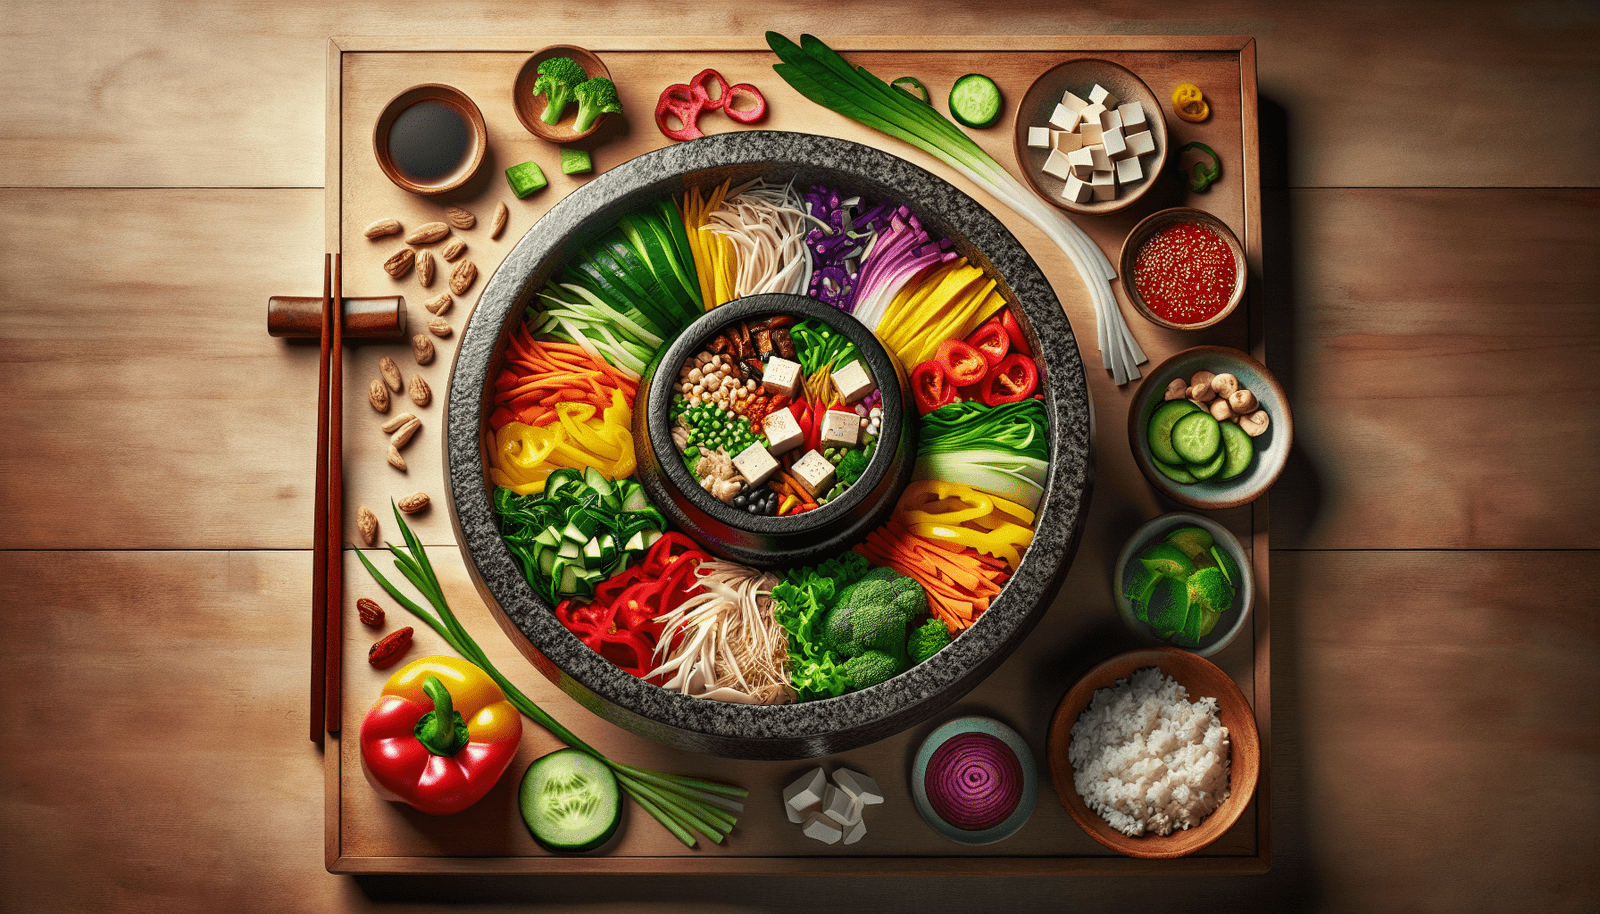 Can You Share Tips For Adapting Korean Recipes For Dietary Restrictions Or Allergies?